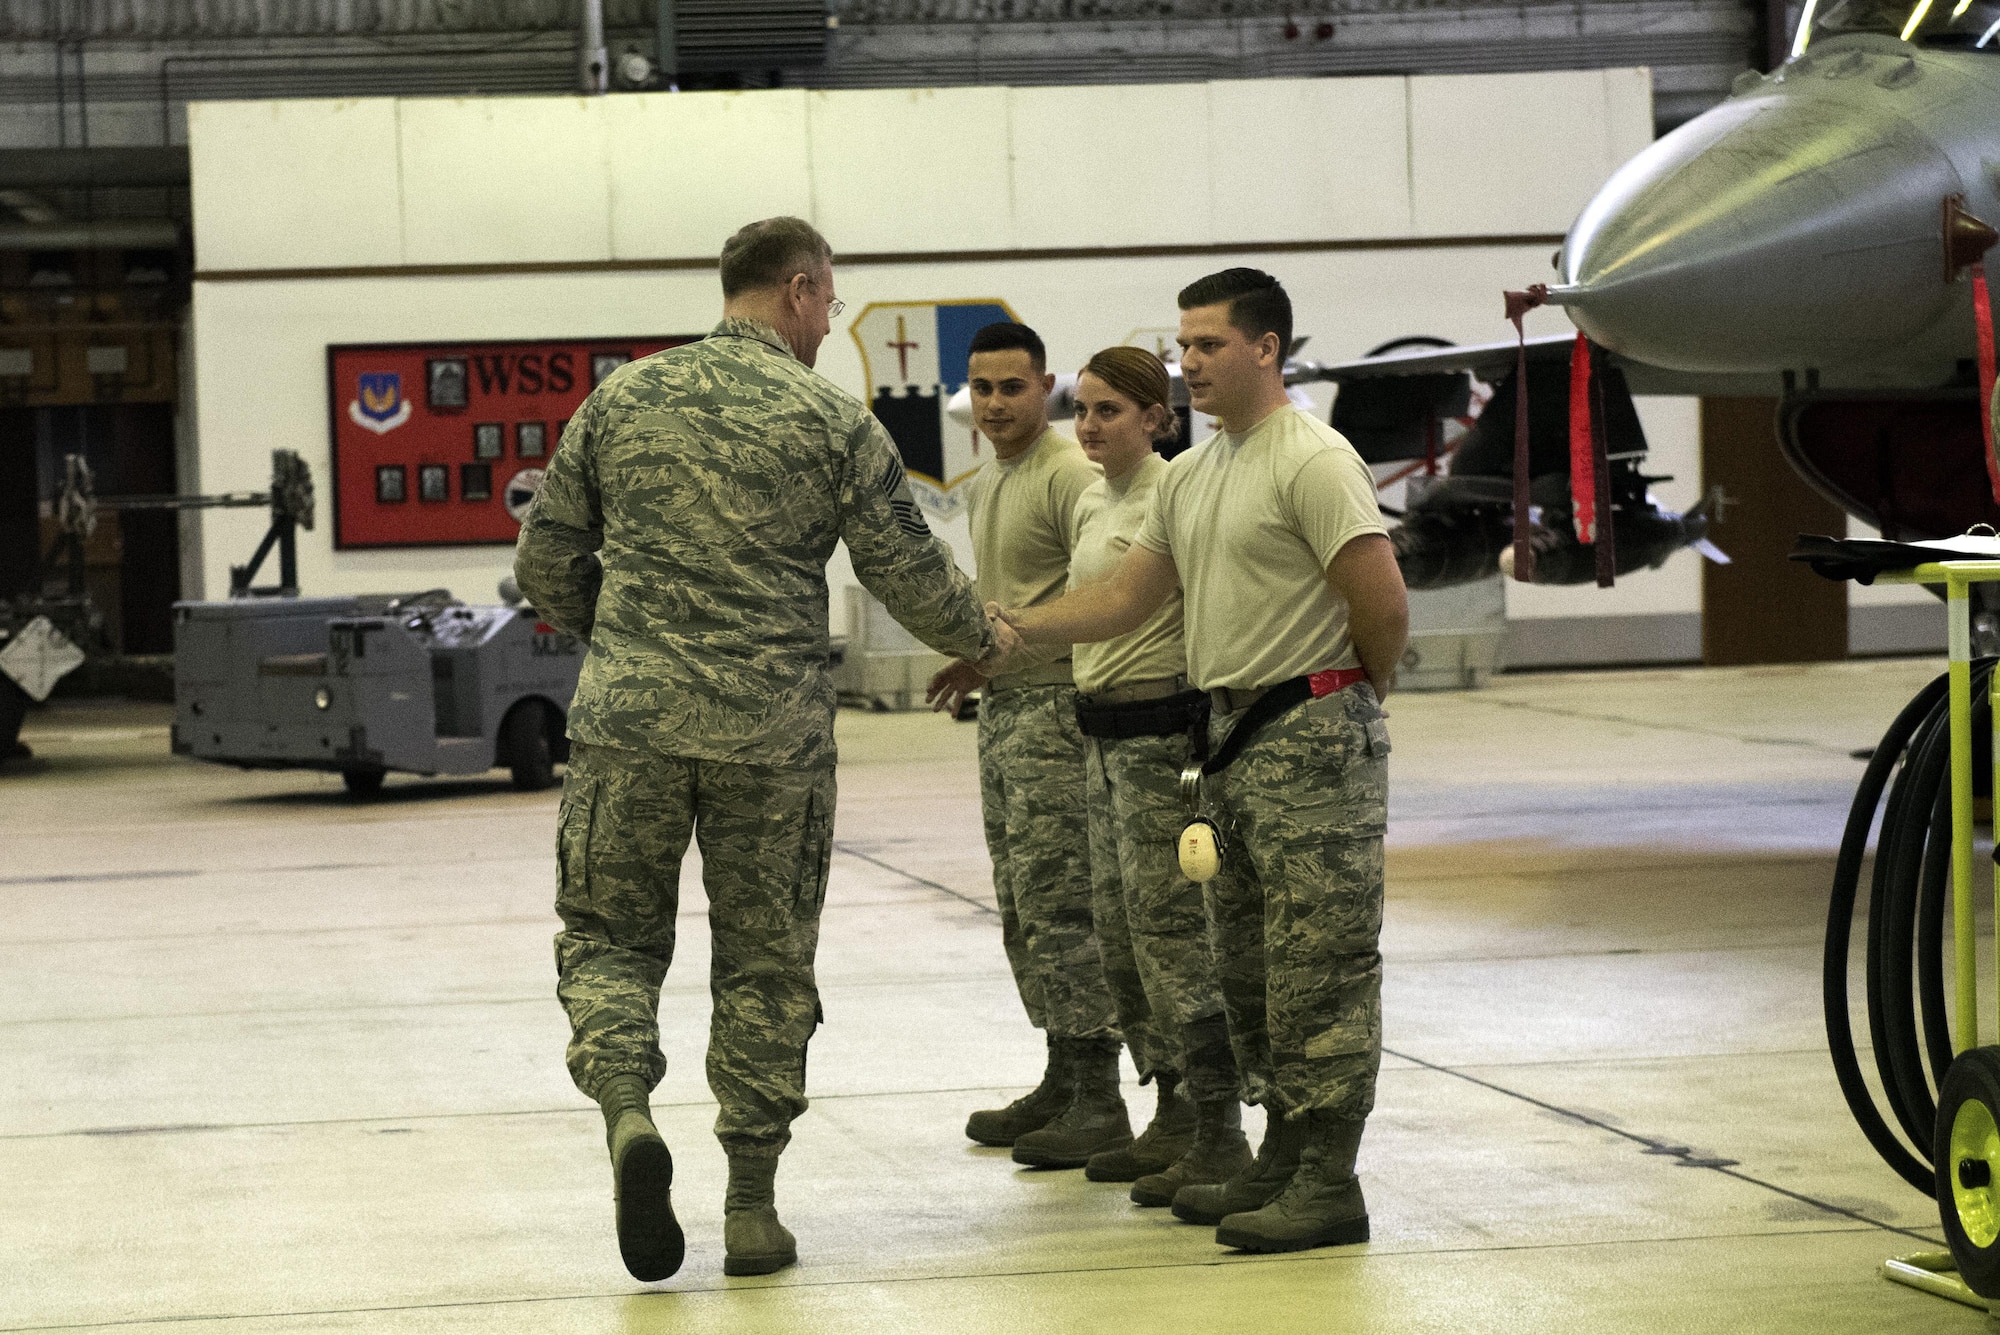 U.S. Air Force Chief Master Sgt. Craig Brandenburg, left, 52nd Maintenance Group wing weapons manager, congratulates the winning Aircraft Maintenance Squadron load crew members during the quarterly weapons load competition in Hangar One at Spangdahlem Air Base, Germany, Nov. 10, 2016. The competition consisted of two teams, each with three load crew members, competing for a spot in the annual load competition.  (U.S. Air Force photo by Airman 1st Class Preston Cherry)